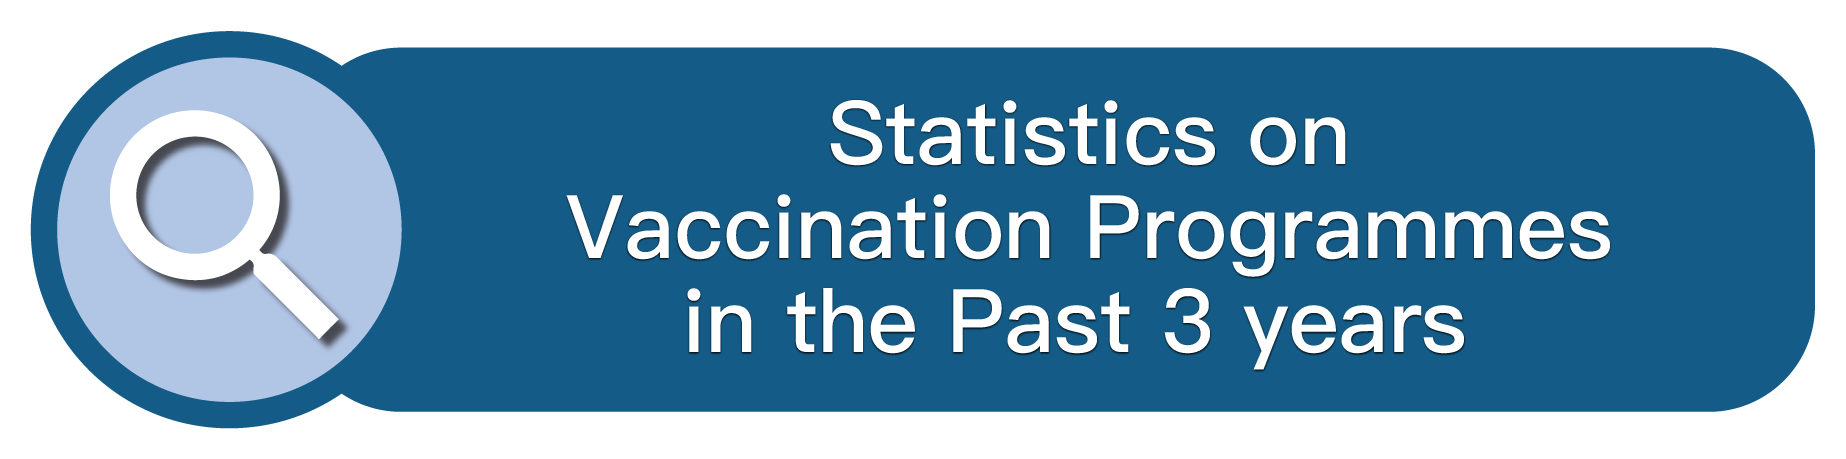 Statistics on Vaccination Programmes in the Past 3 Years